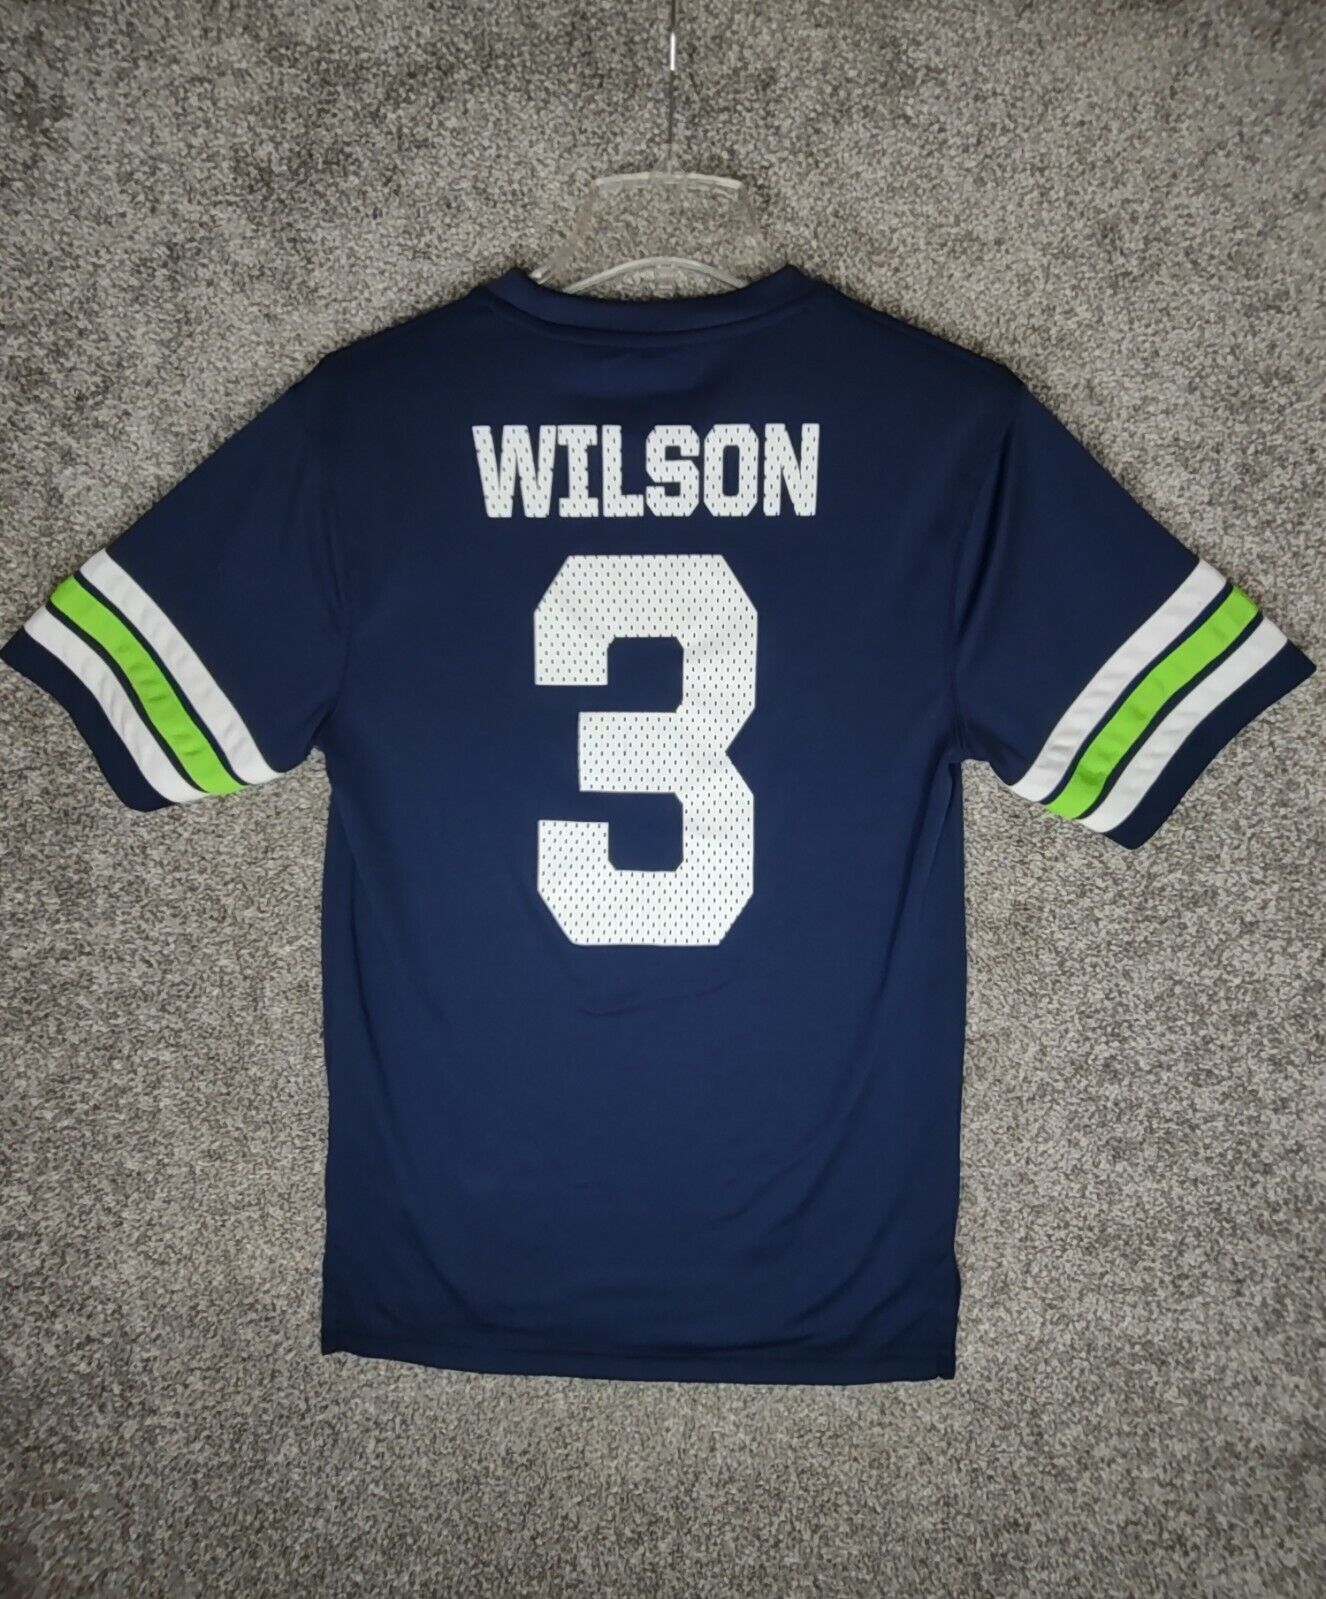 Seattle Seahawks Russell Wilson Jersey Adult Small Shirt NFL Team Apparel 2016 - $8.99